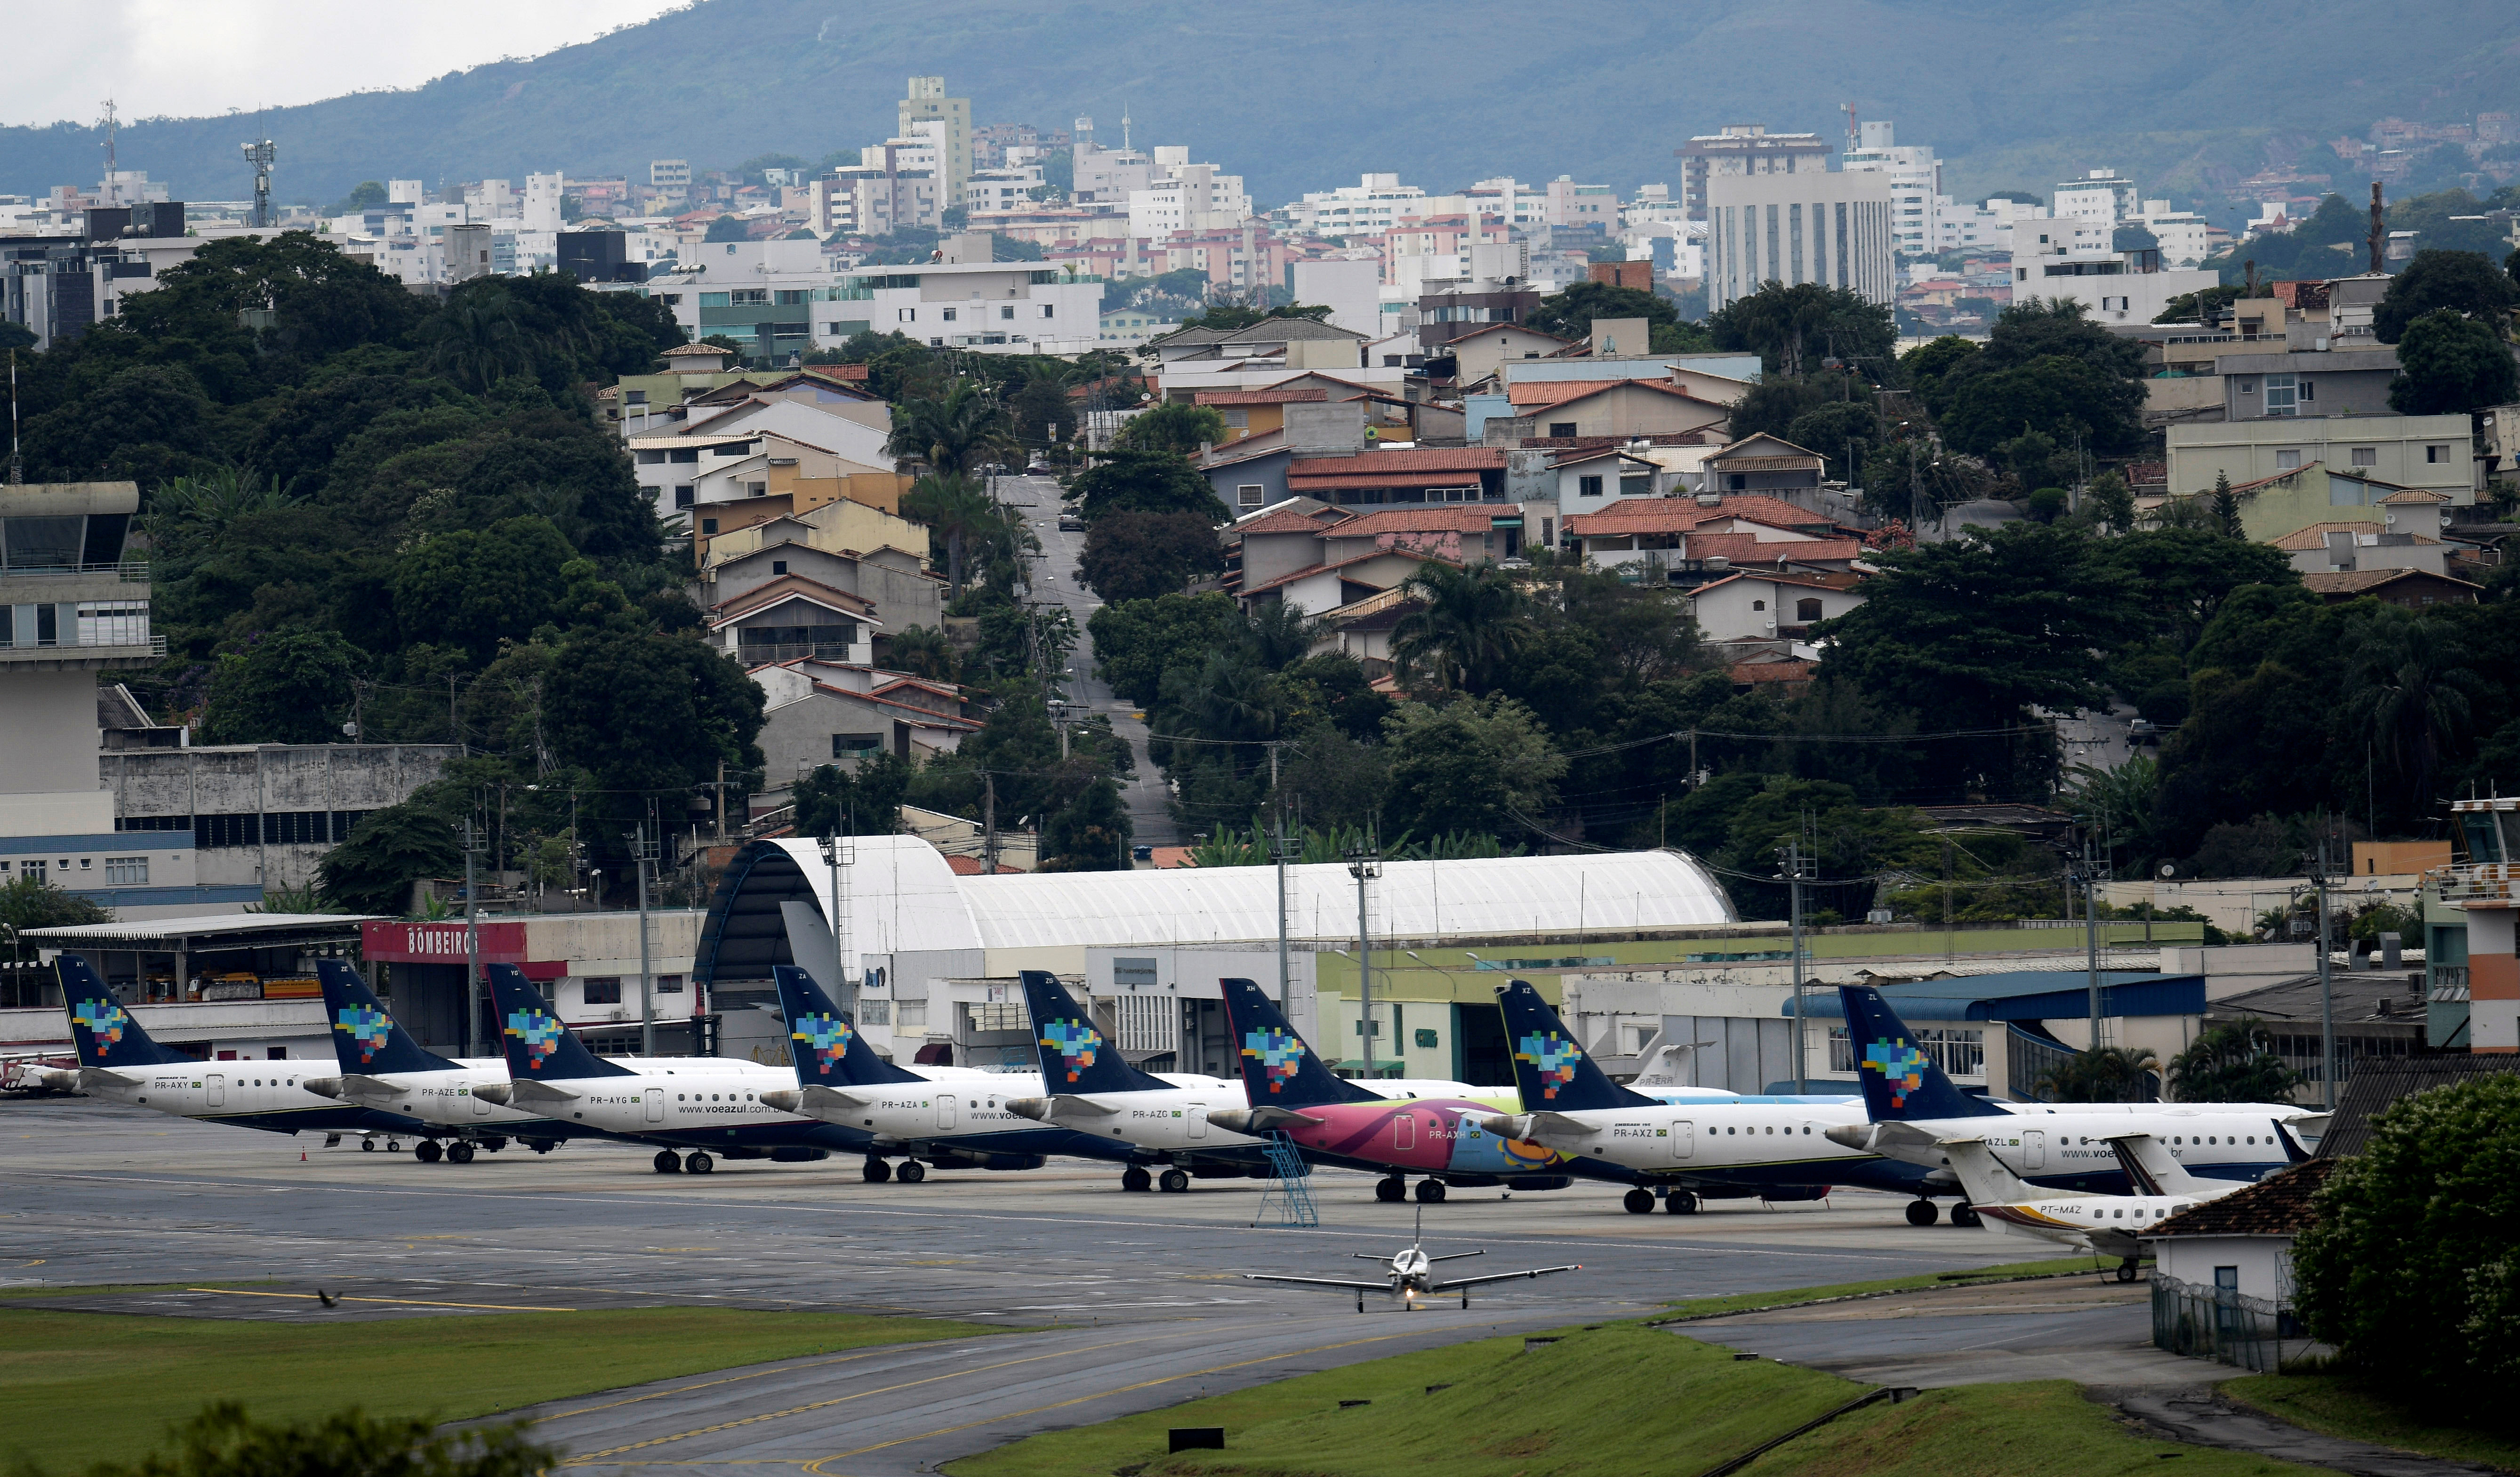 Airplanes of Brazilian airline Azul are seen at the Pampulha airport after the company suspended several flights, amid a coronavirus disease (COVID-19) outbreak, in Belo Horizonte